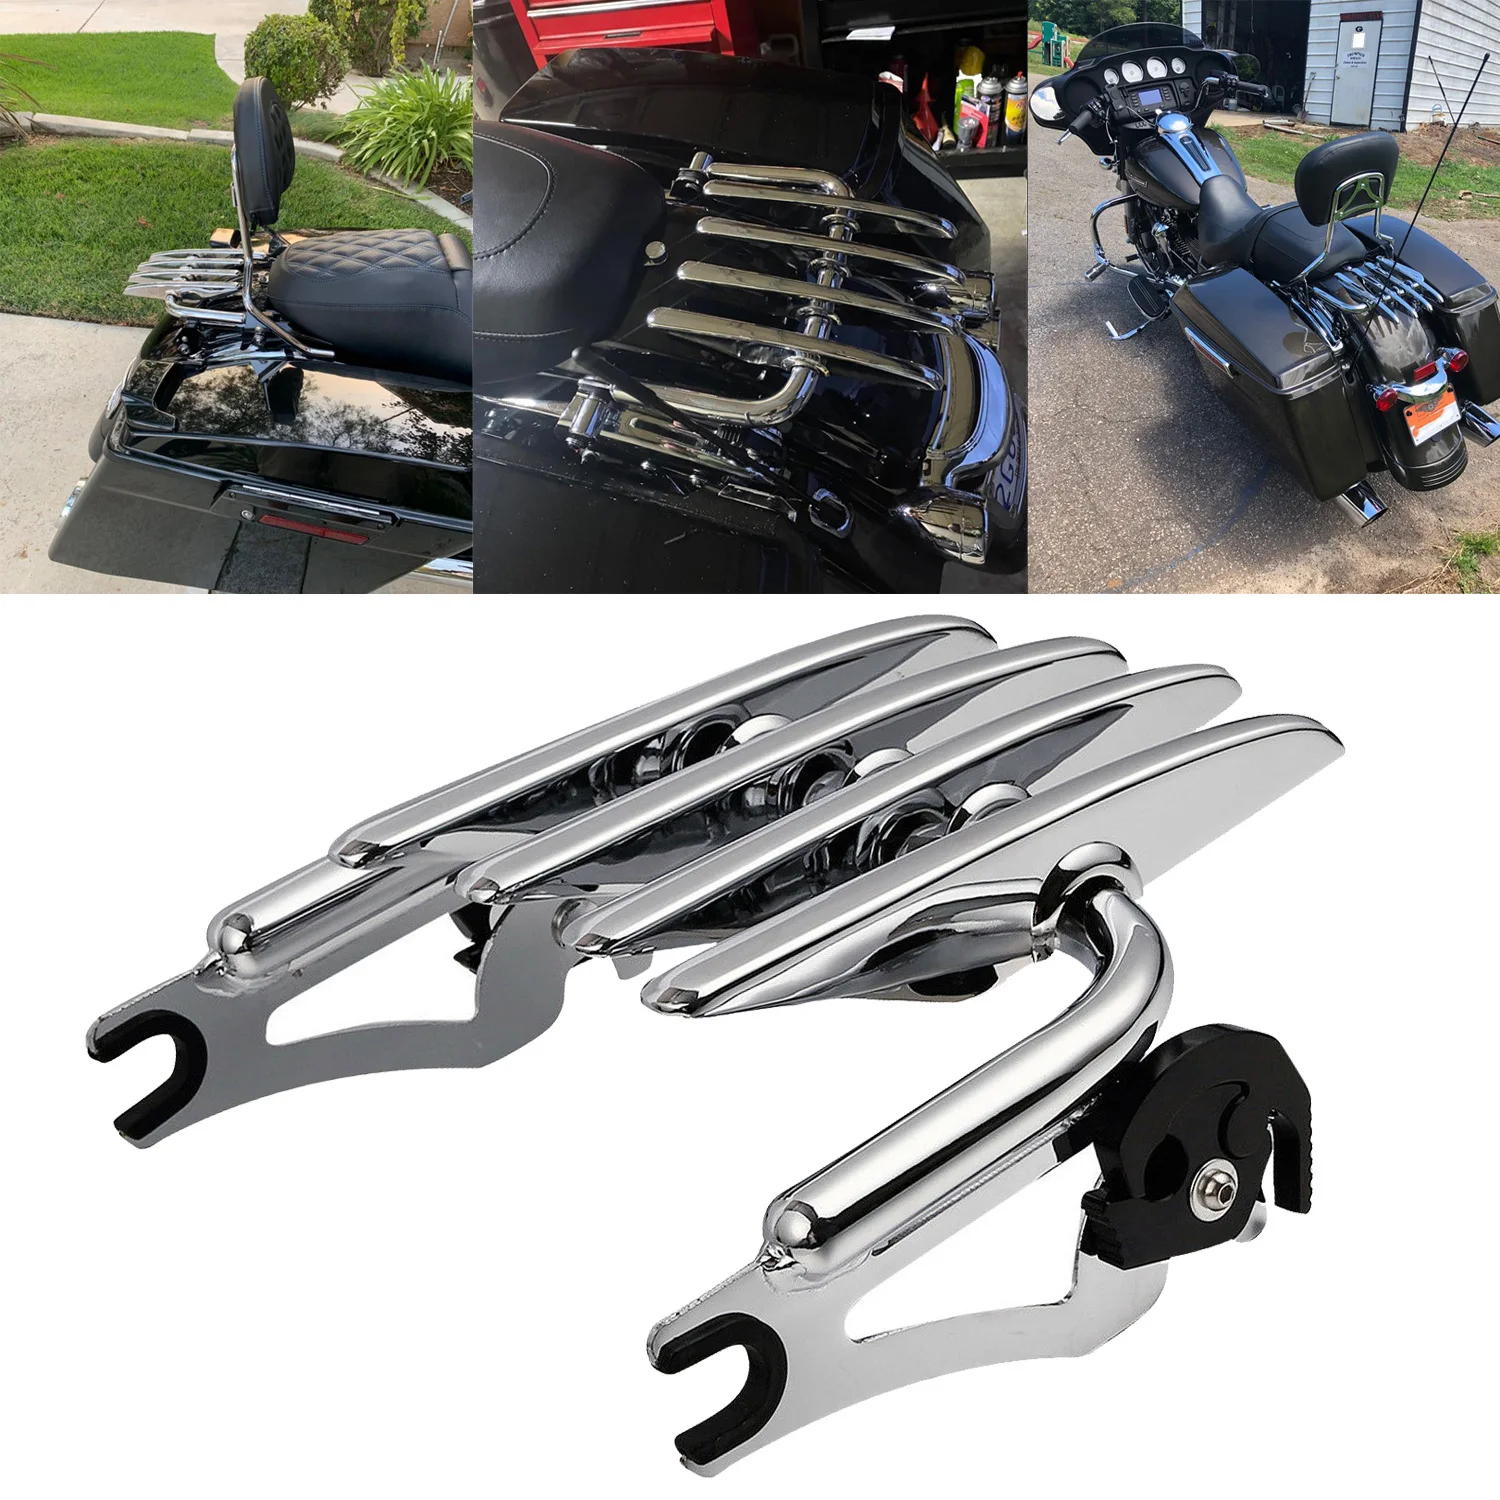 Chrome Detachable Two-Up Stealth Mounting Luggage Rack For Harley Touring Street Electra Glide Road King FLHT FLHX 2009-2023 motorcycle lock sets hard saddlebag lock key for harley touring electra glide road king cvo flhx flht r flh 2014 2020